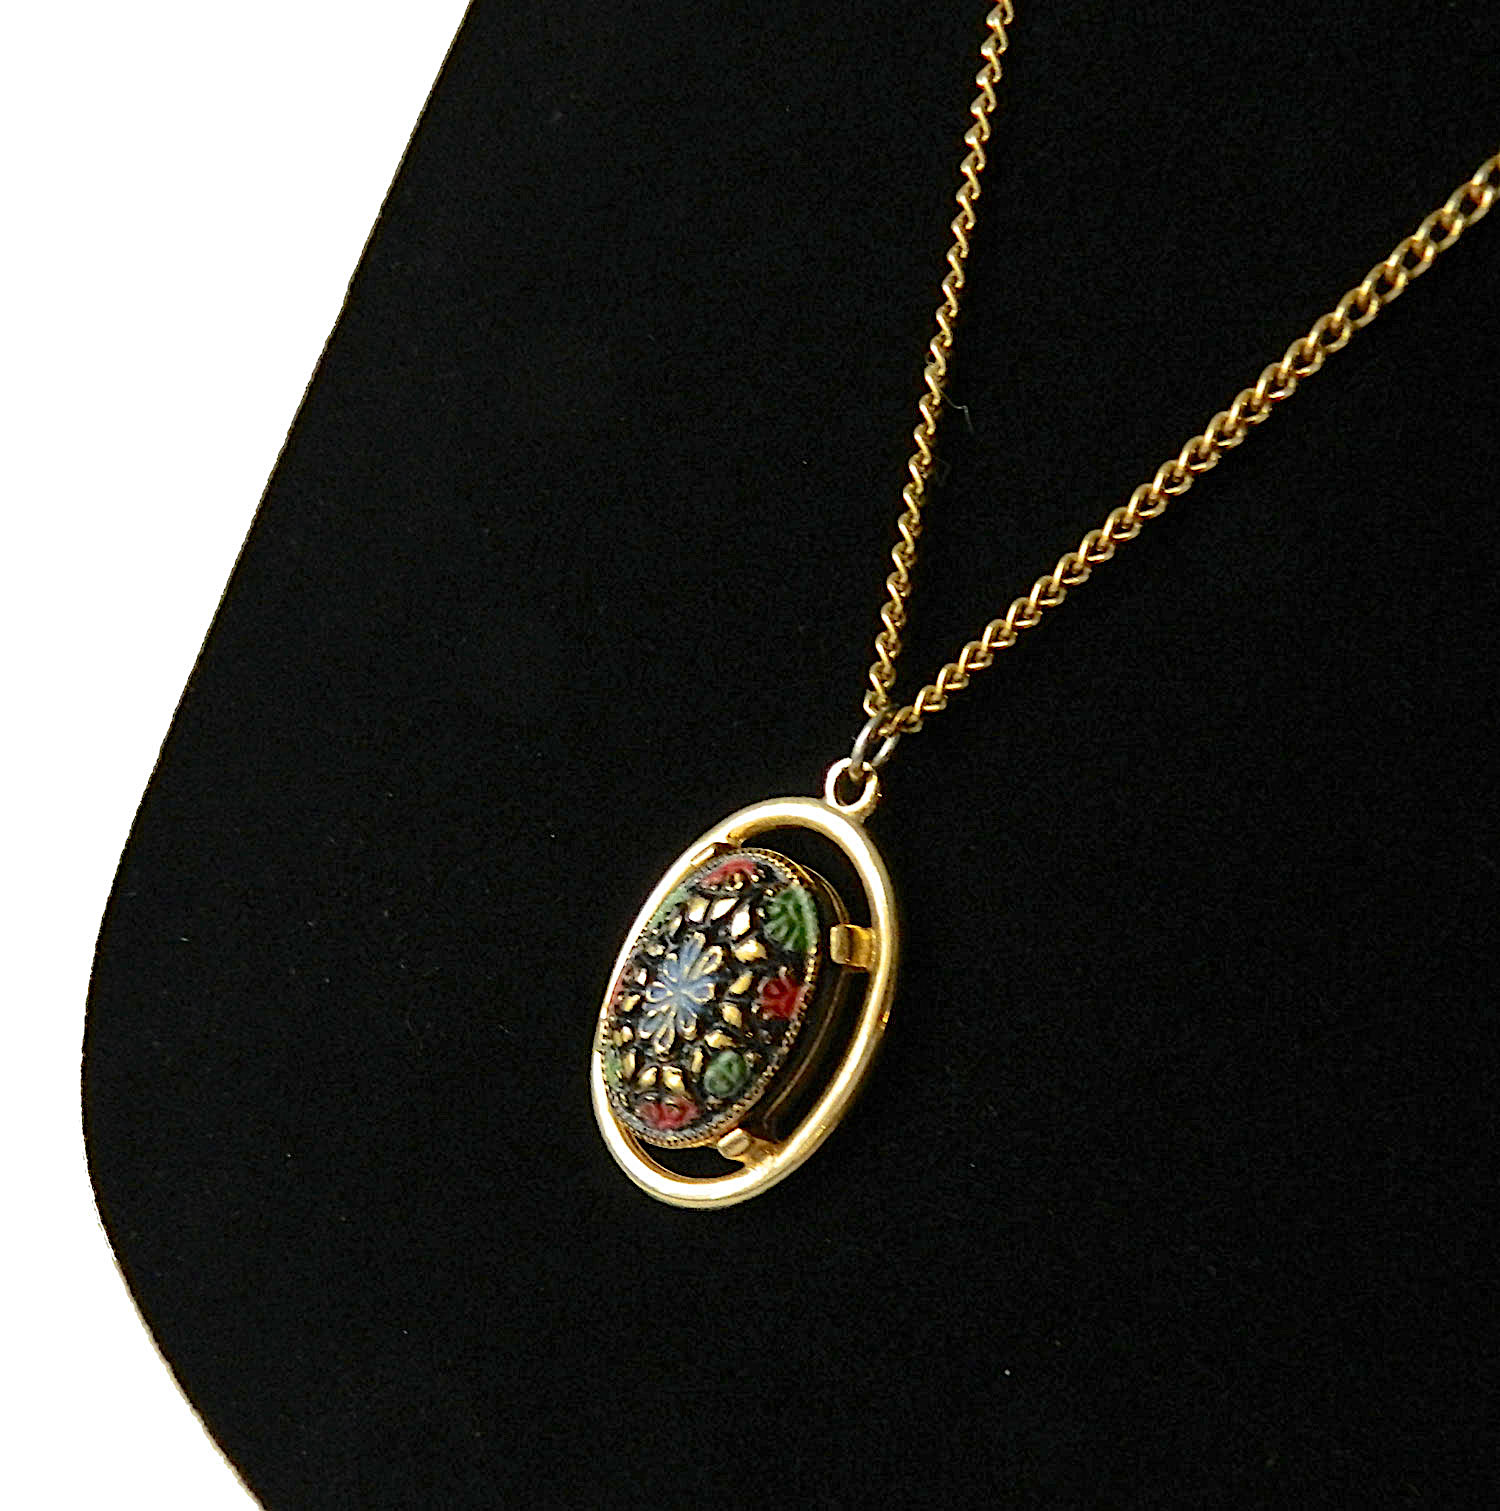 sarah coventry Light of the East pendant necklace